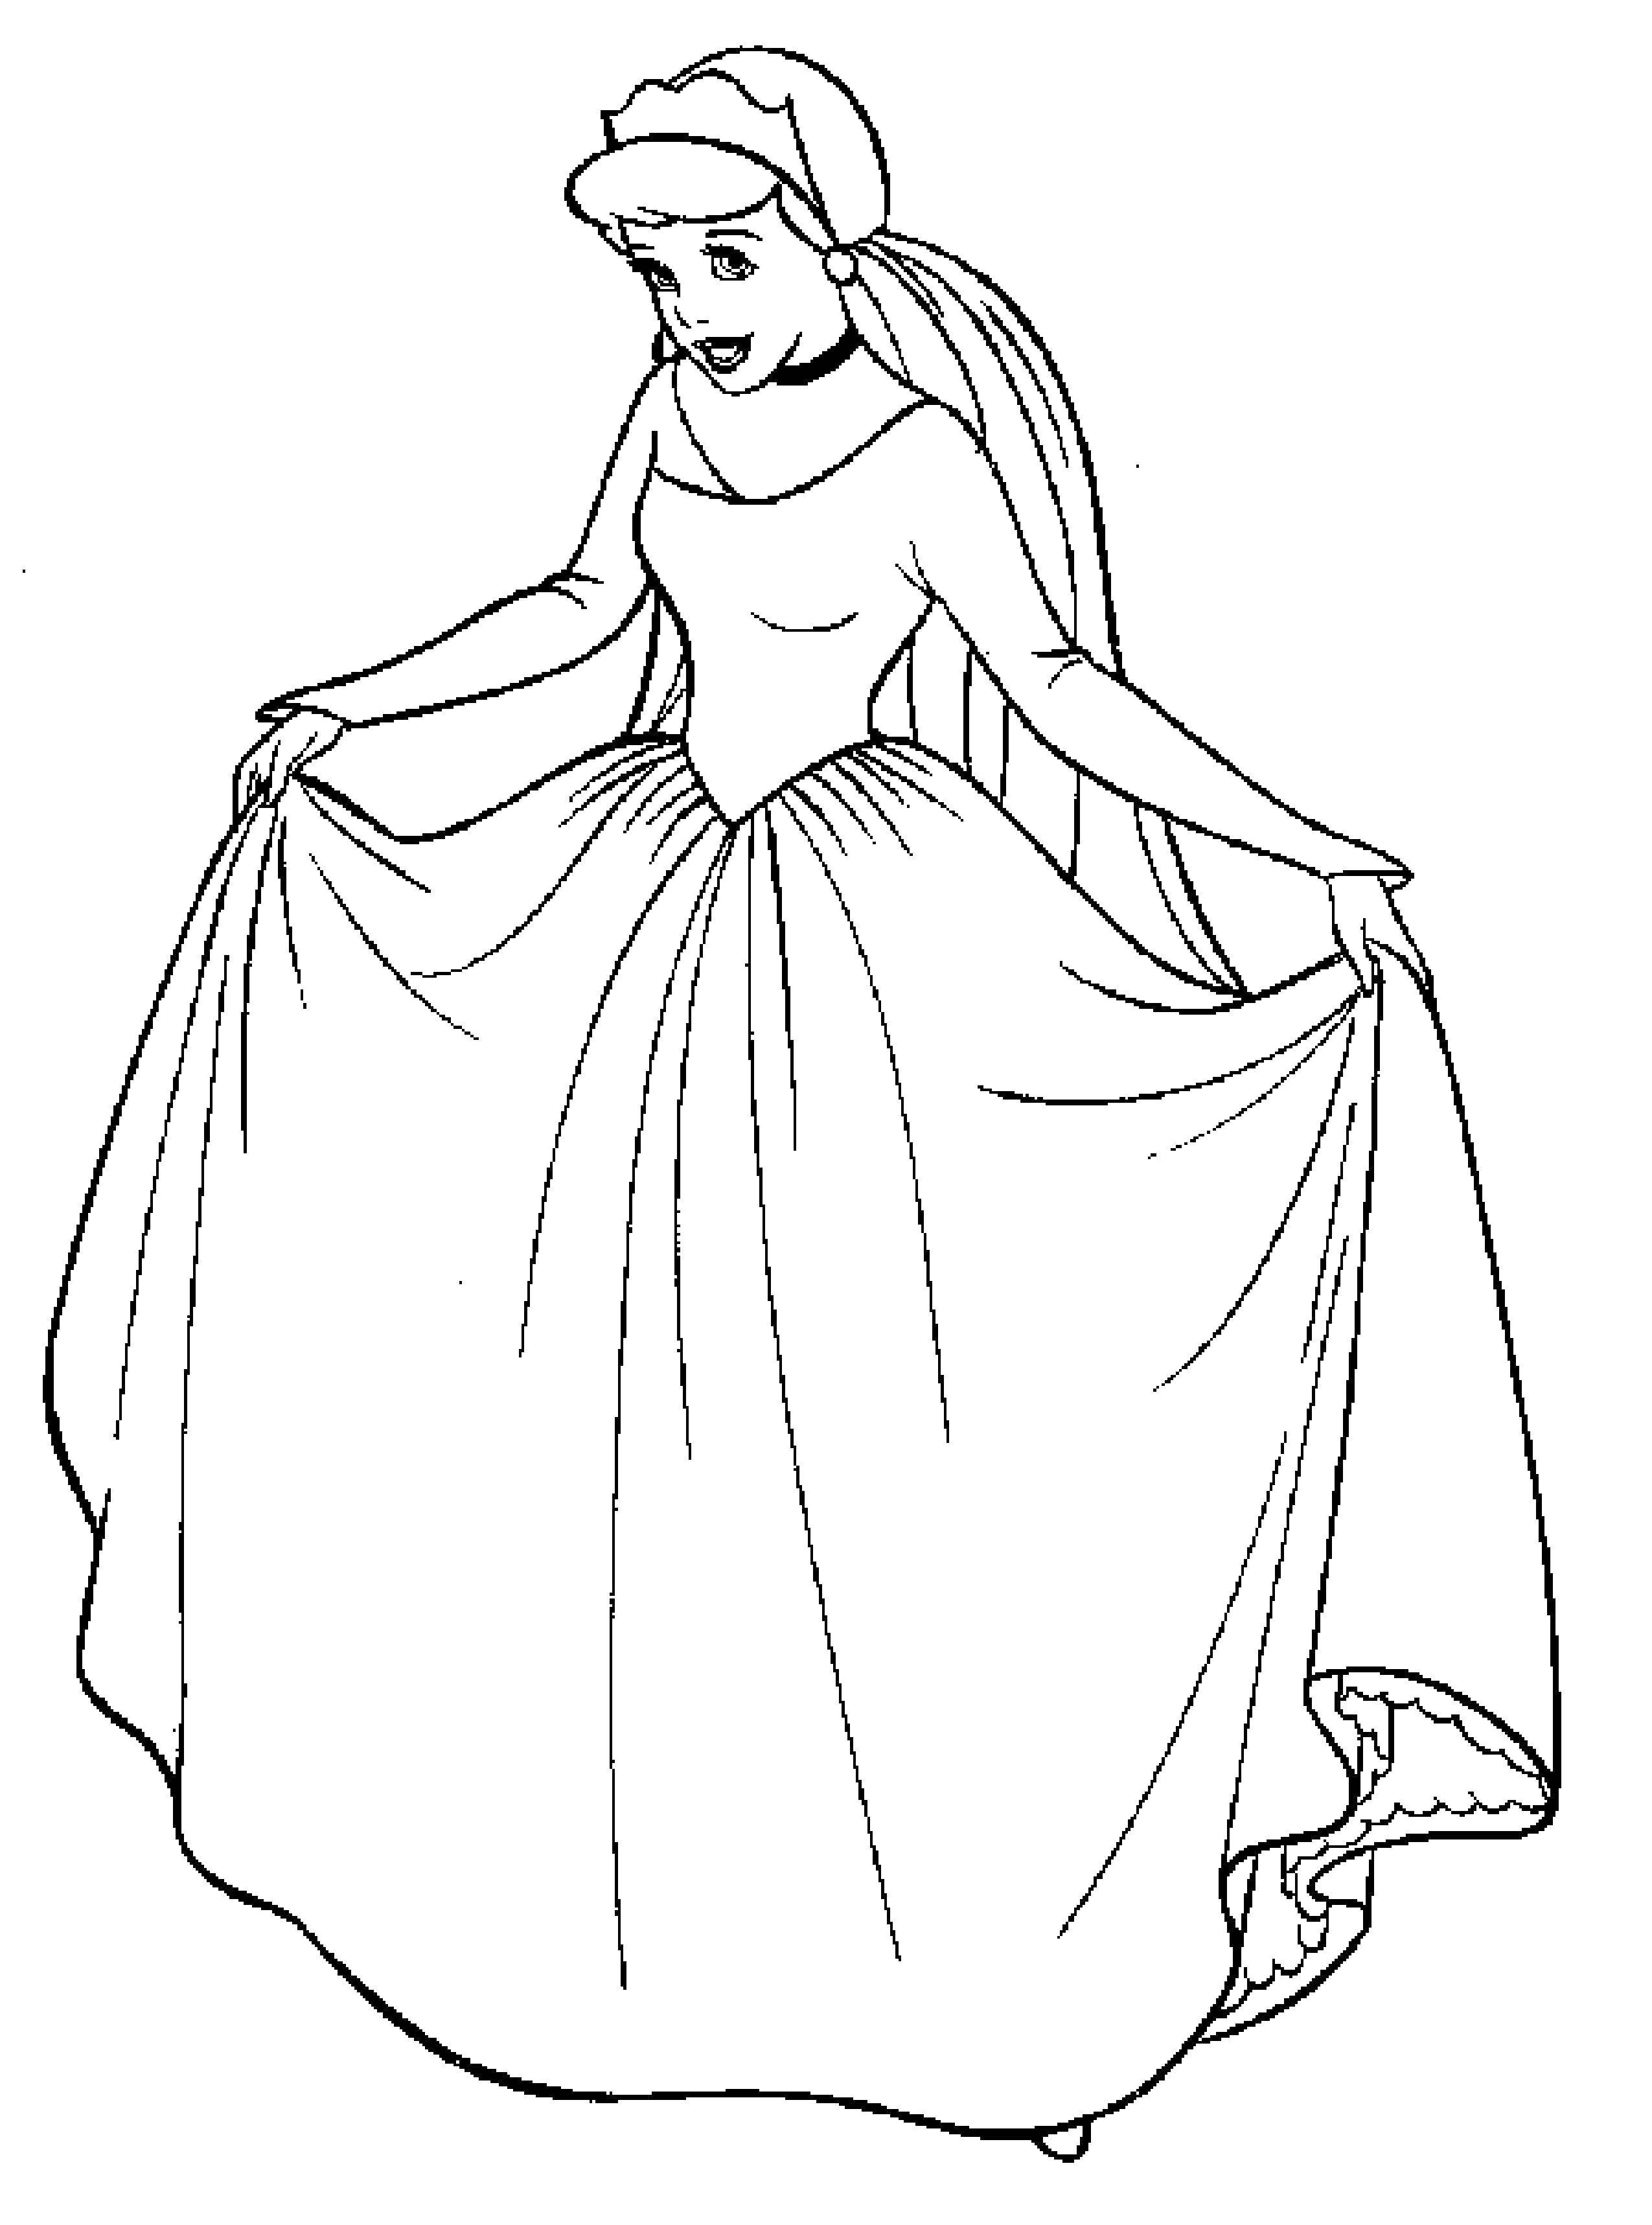 Coloring Cinderella tries on a wedding dress. Category Disney coloring pages. Tags:  Cinderella dress.